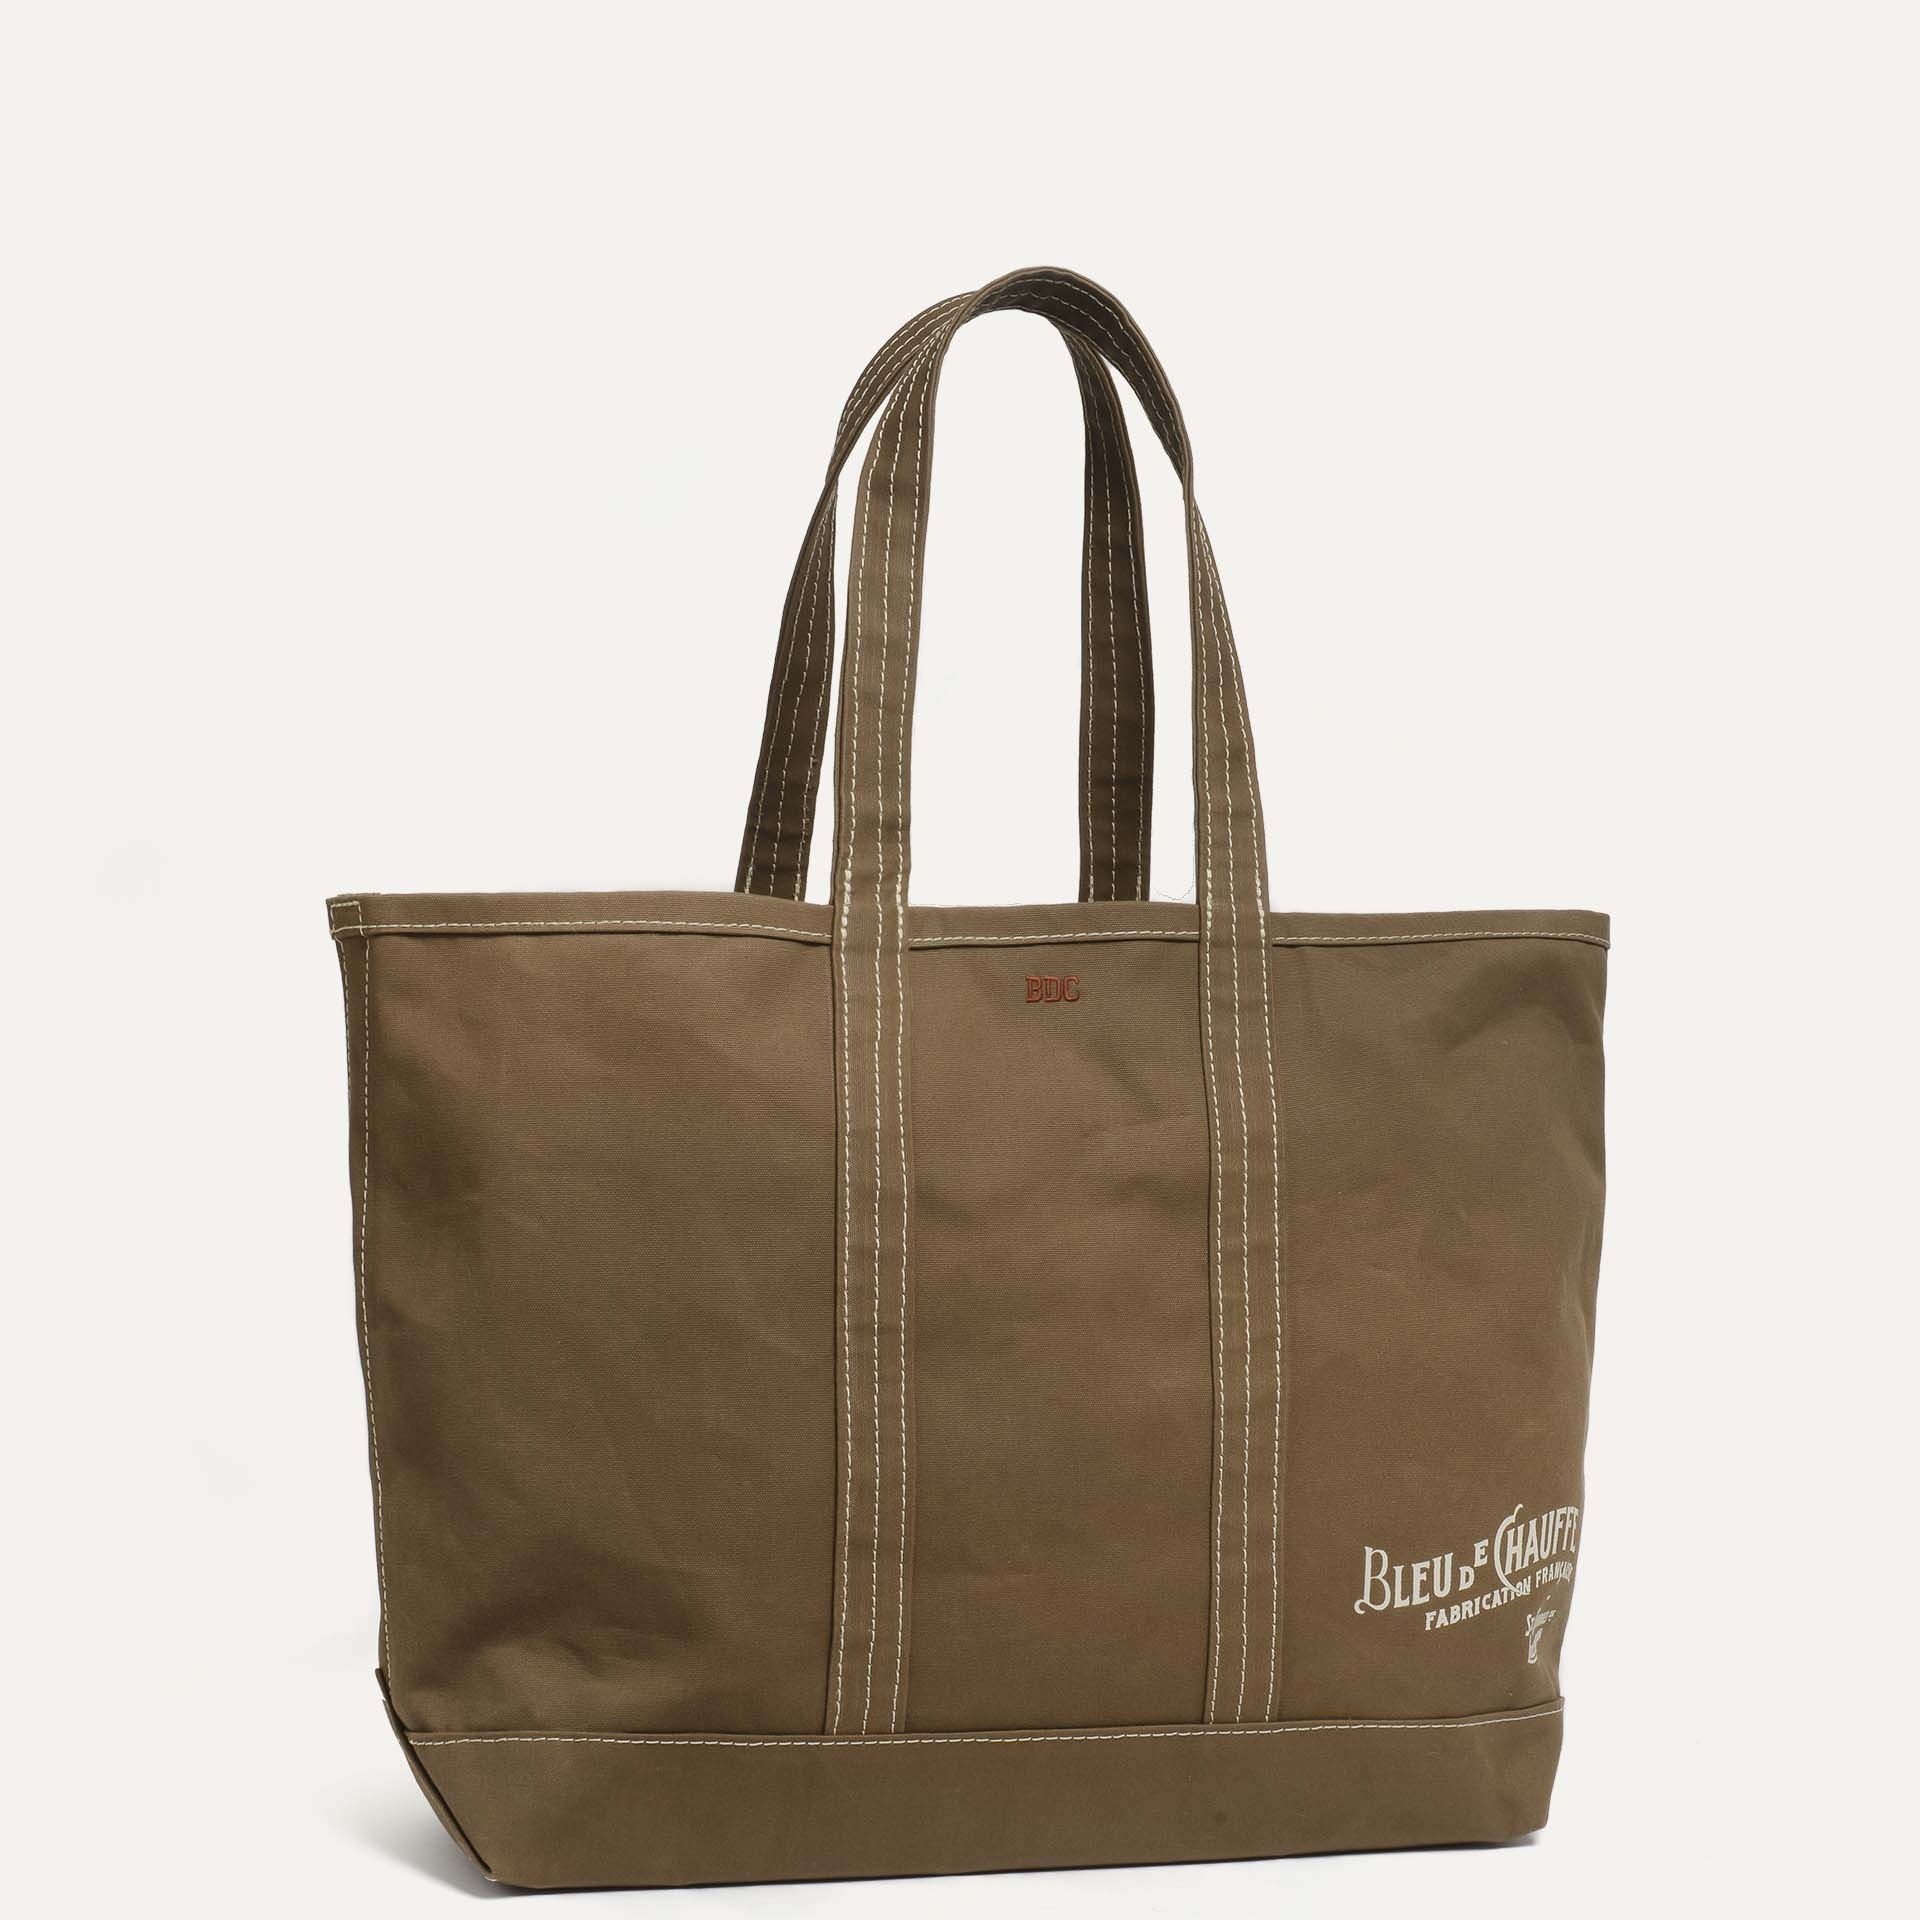 Labor Day Tote - Camel (image n°3)